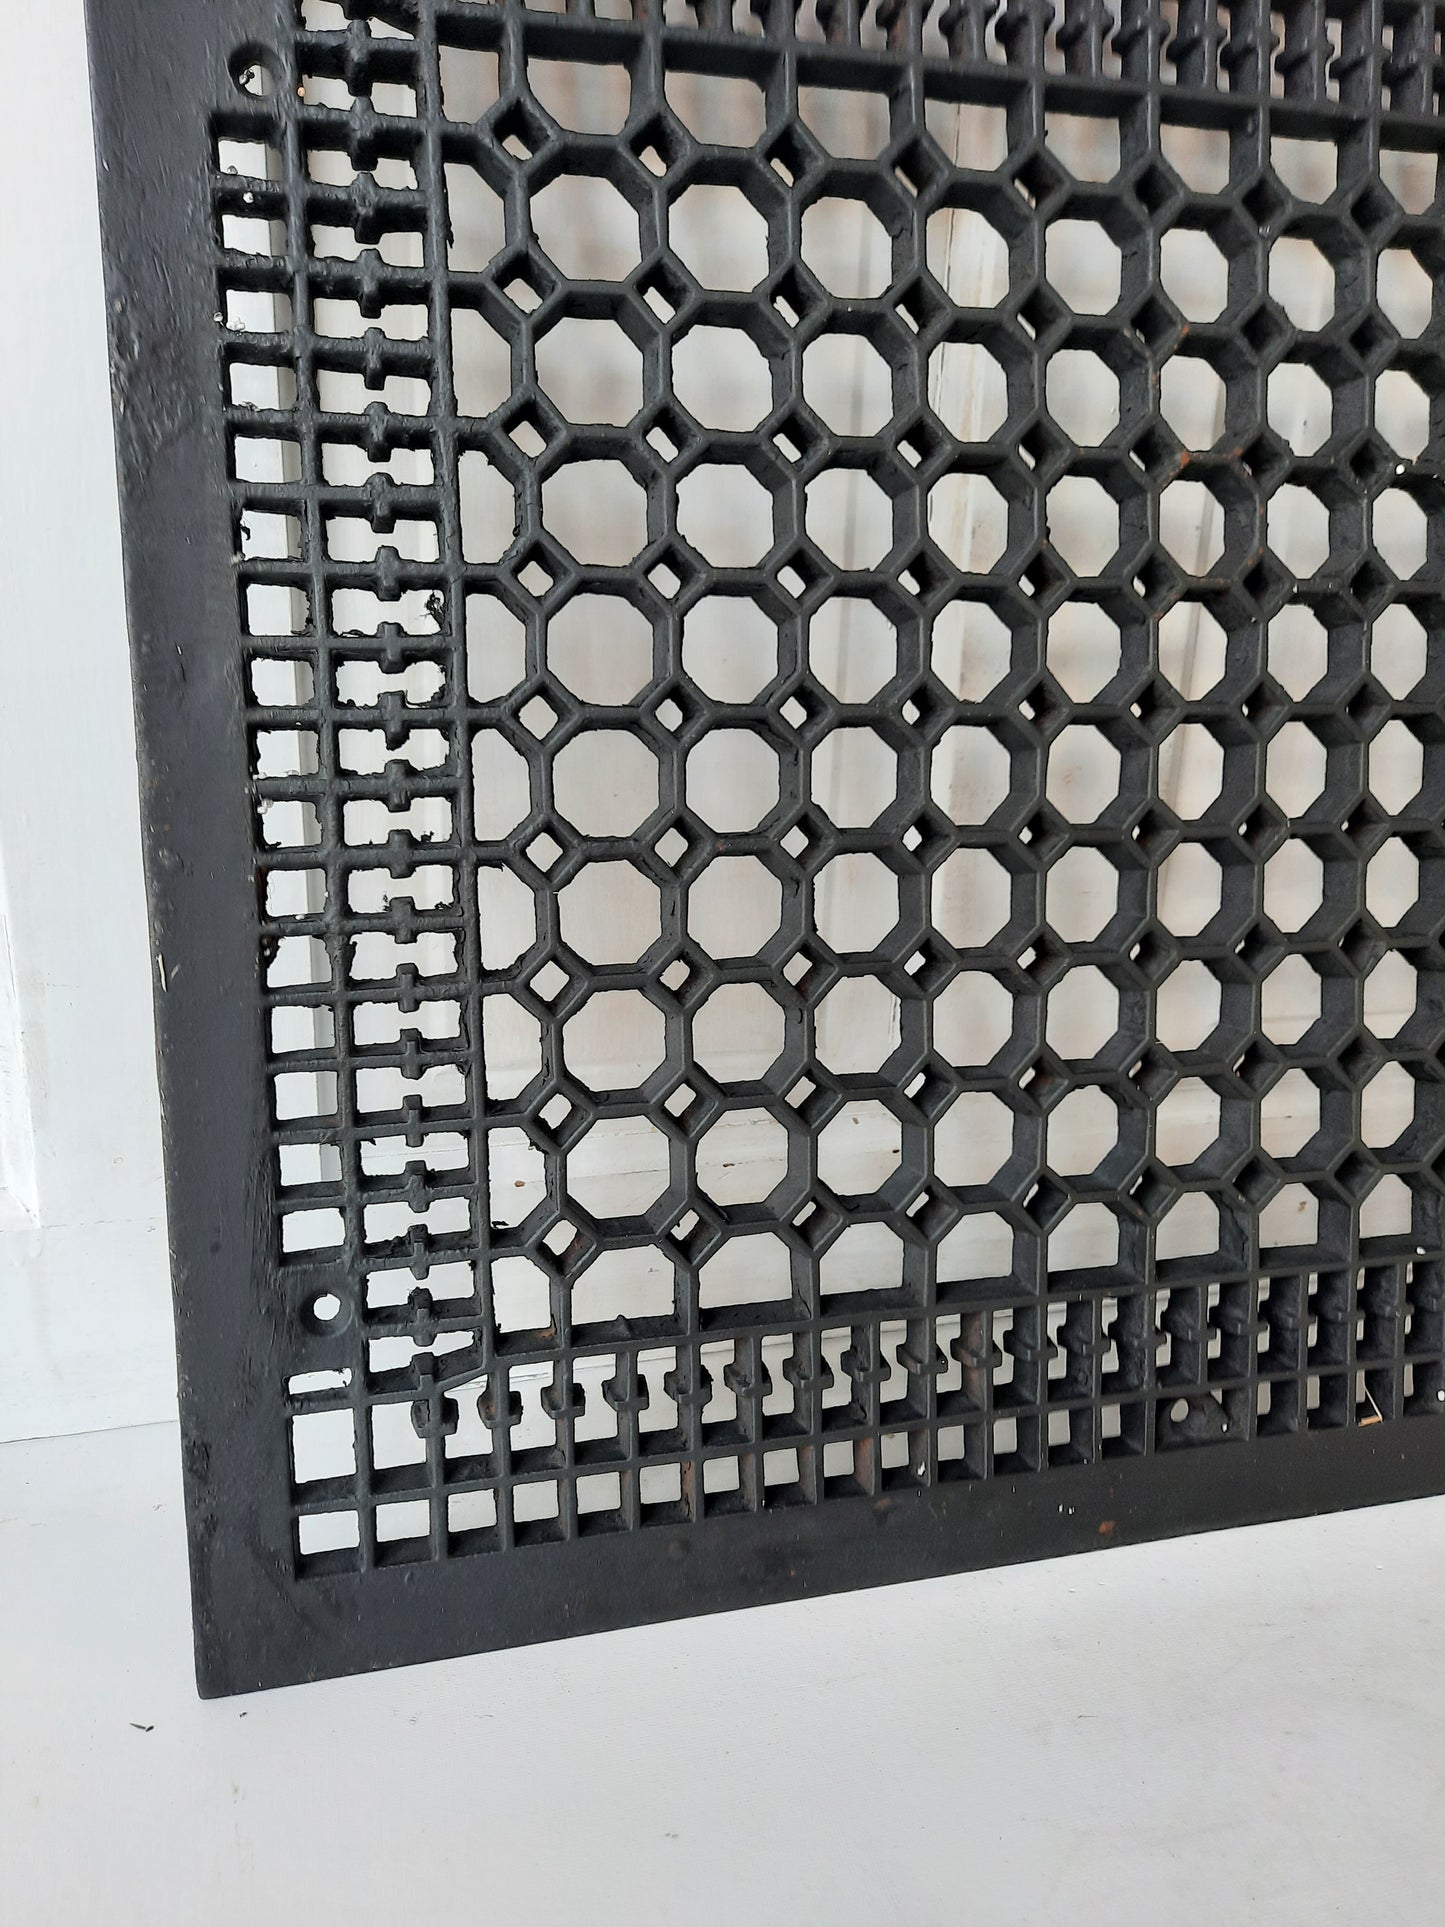 HOLD 22 x 26 Large Heavy Iron Floor Grate, Cold Air Return Metal Floor Register Cover #022201